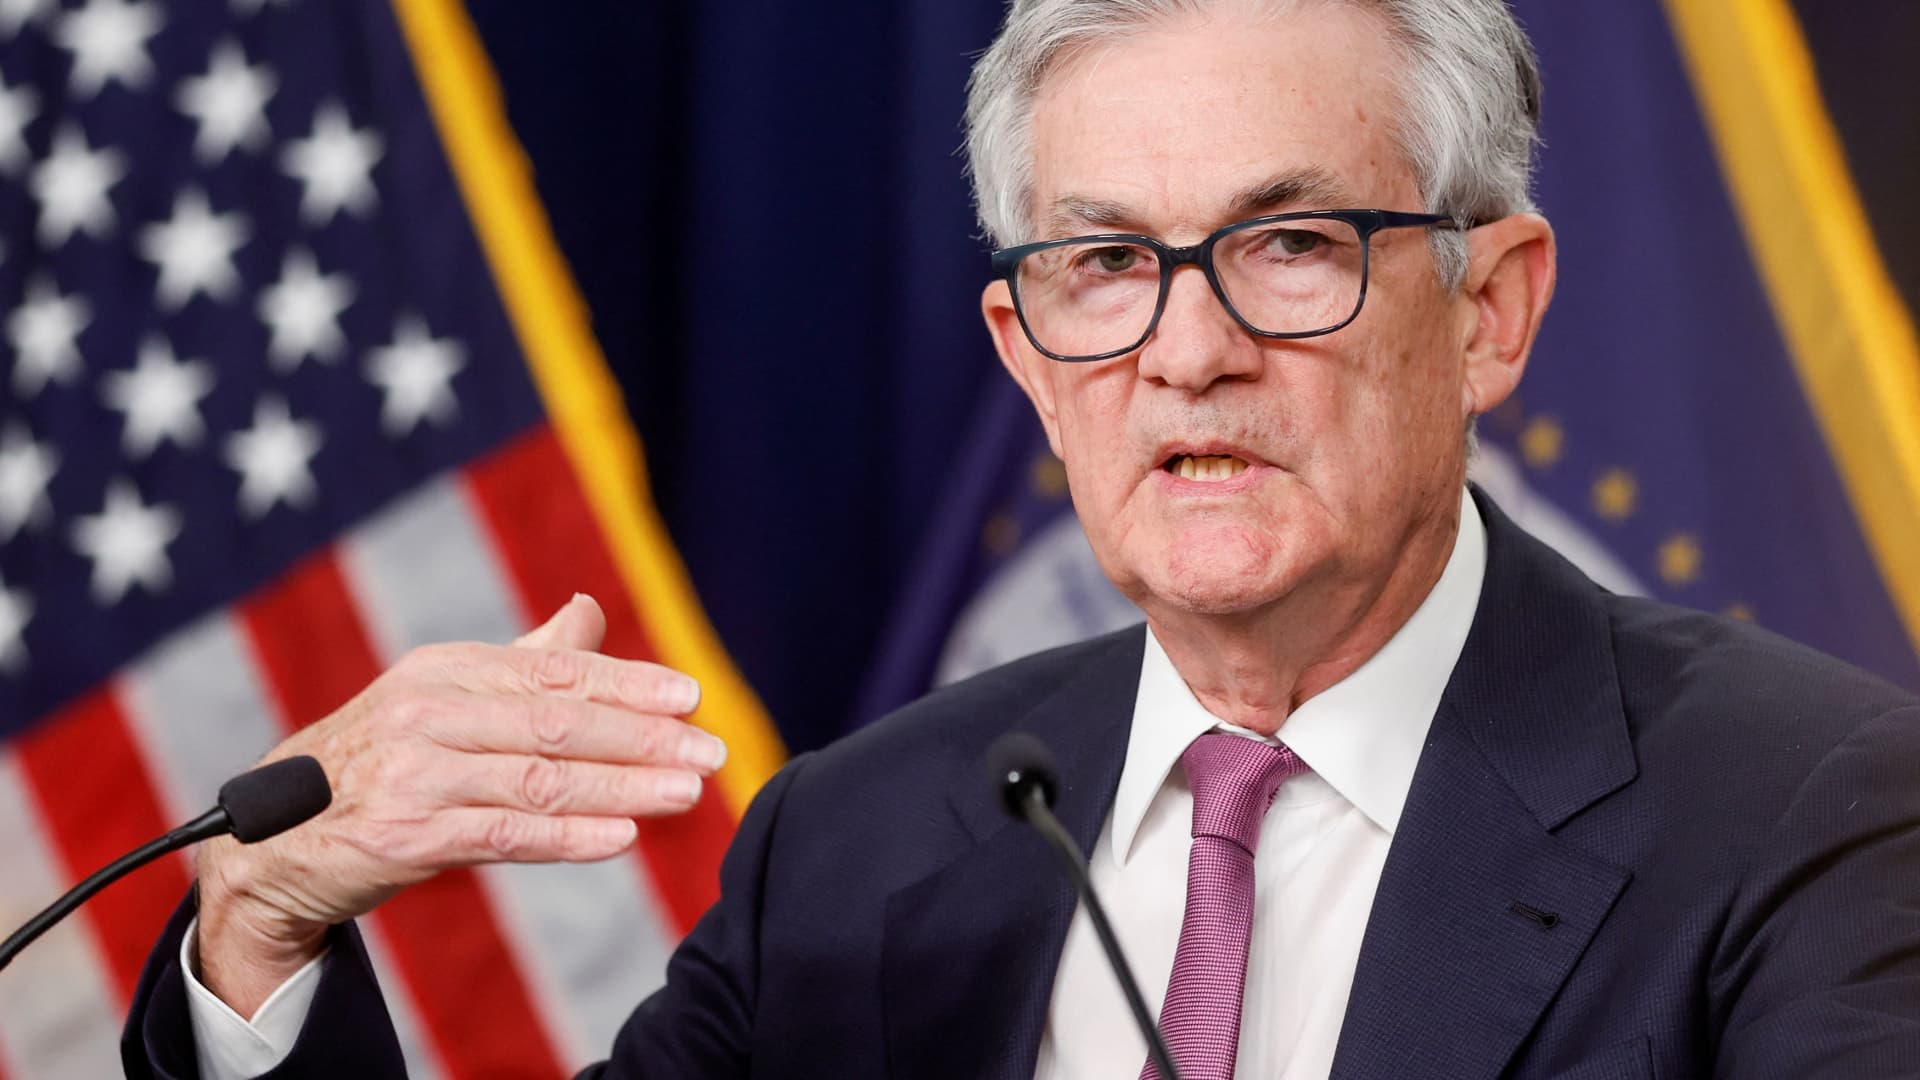 Fed poised to approve quarter-point rate hike this week, despite market turmoil